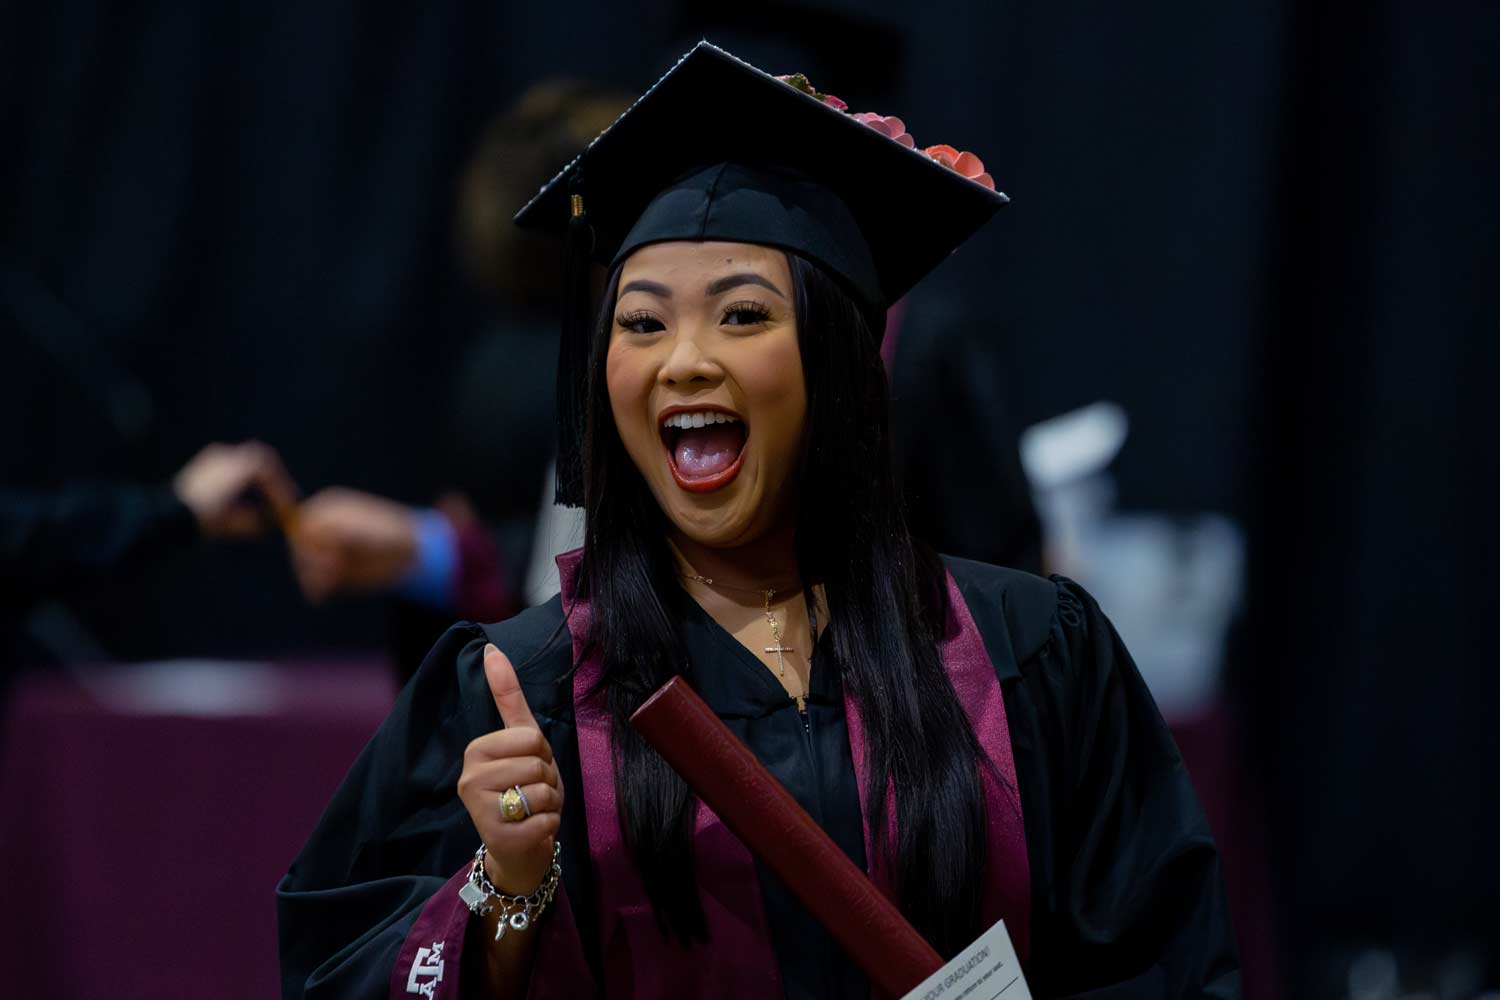 Student smiles and poses for a photo after walking the stage at graduation